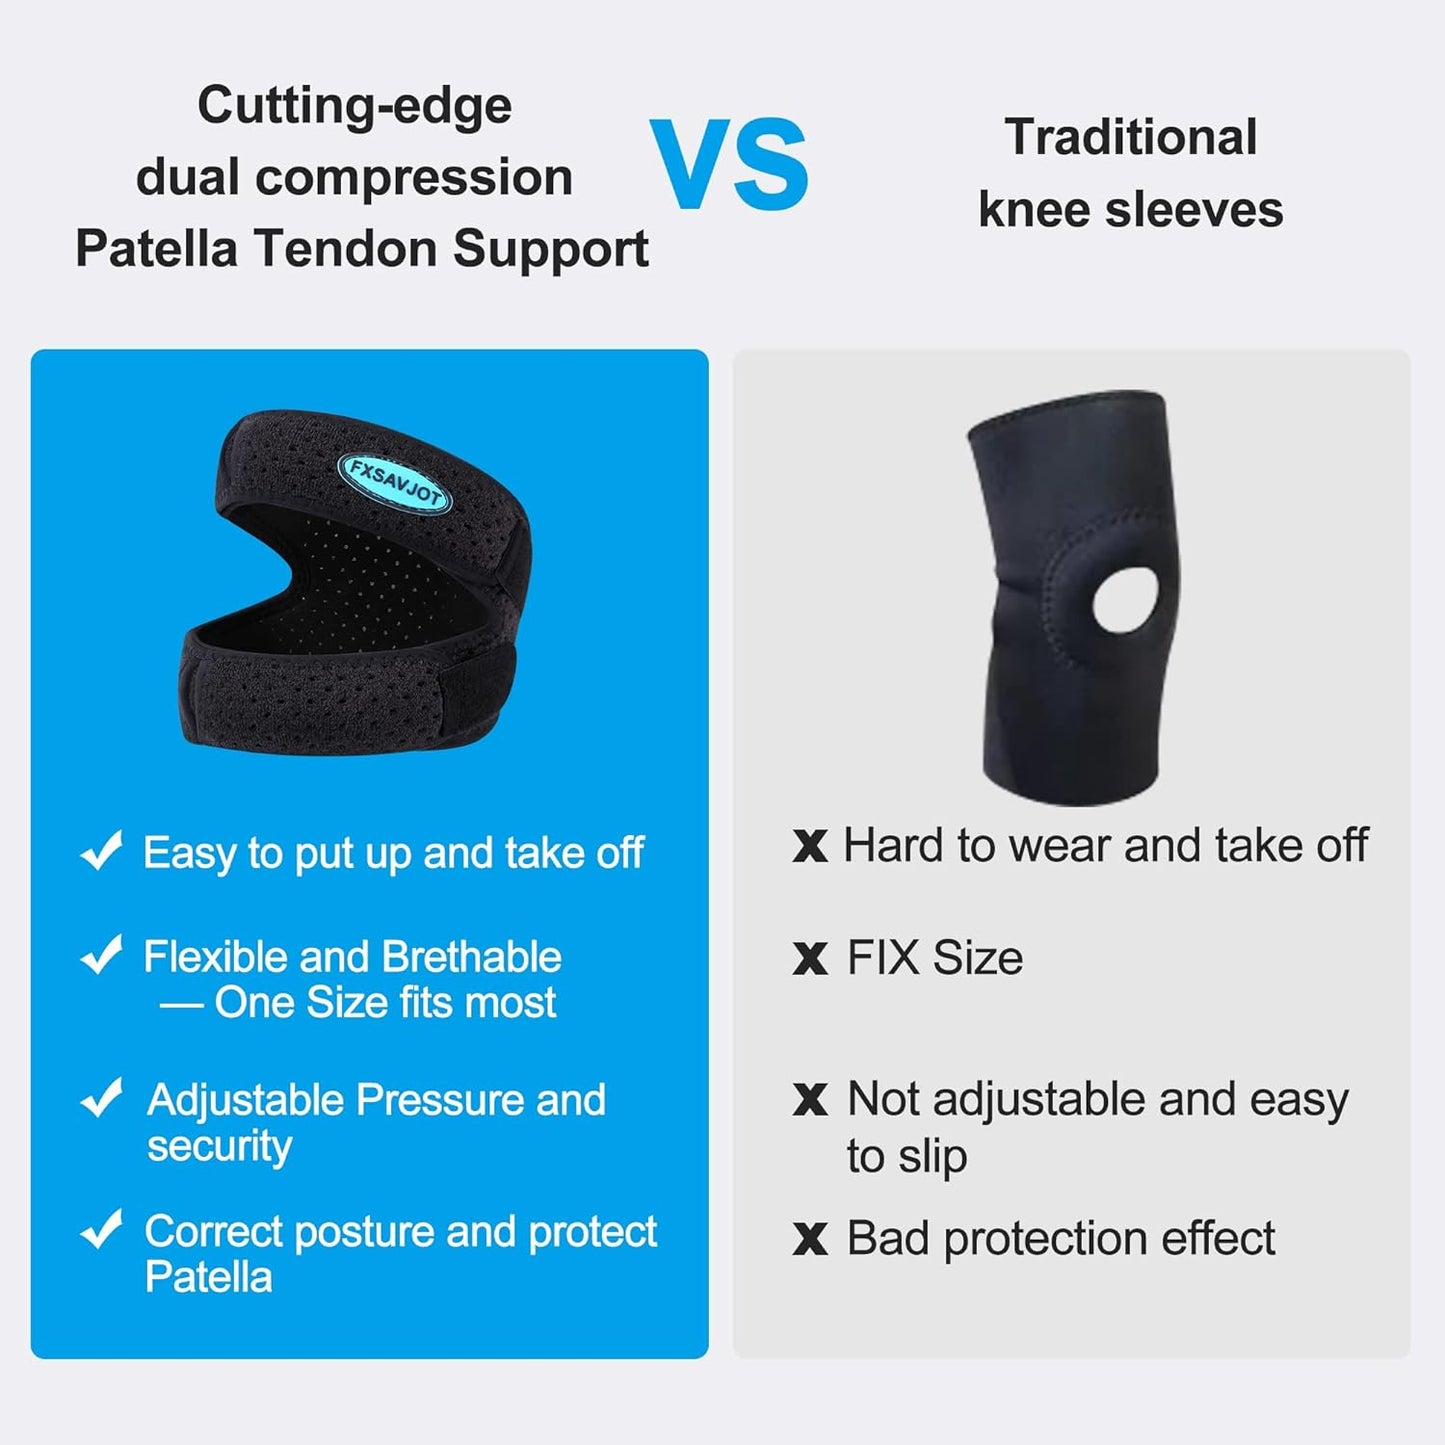 New Professional Patella Knee Brace Pro for Knee Pain/Meniscus Tear, Adjustable Compression Patellar Tendon Support Strap for Man and Women/Outdoor Activities(Black, Small)